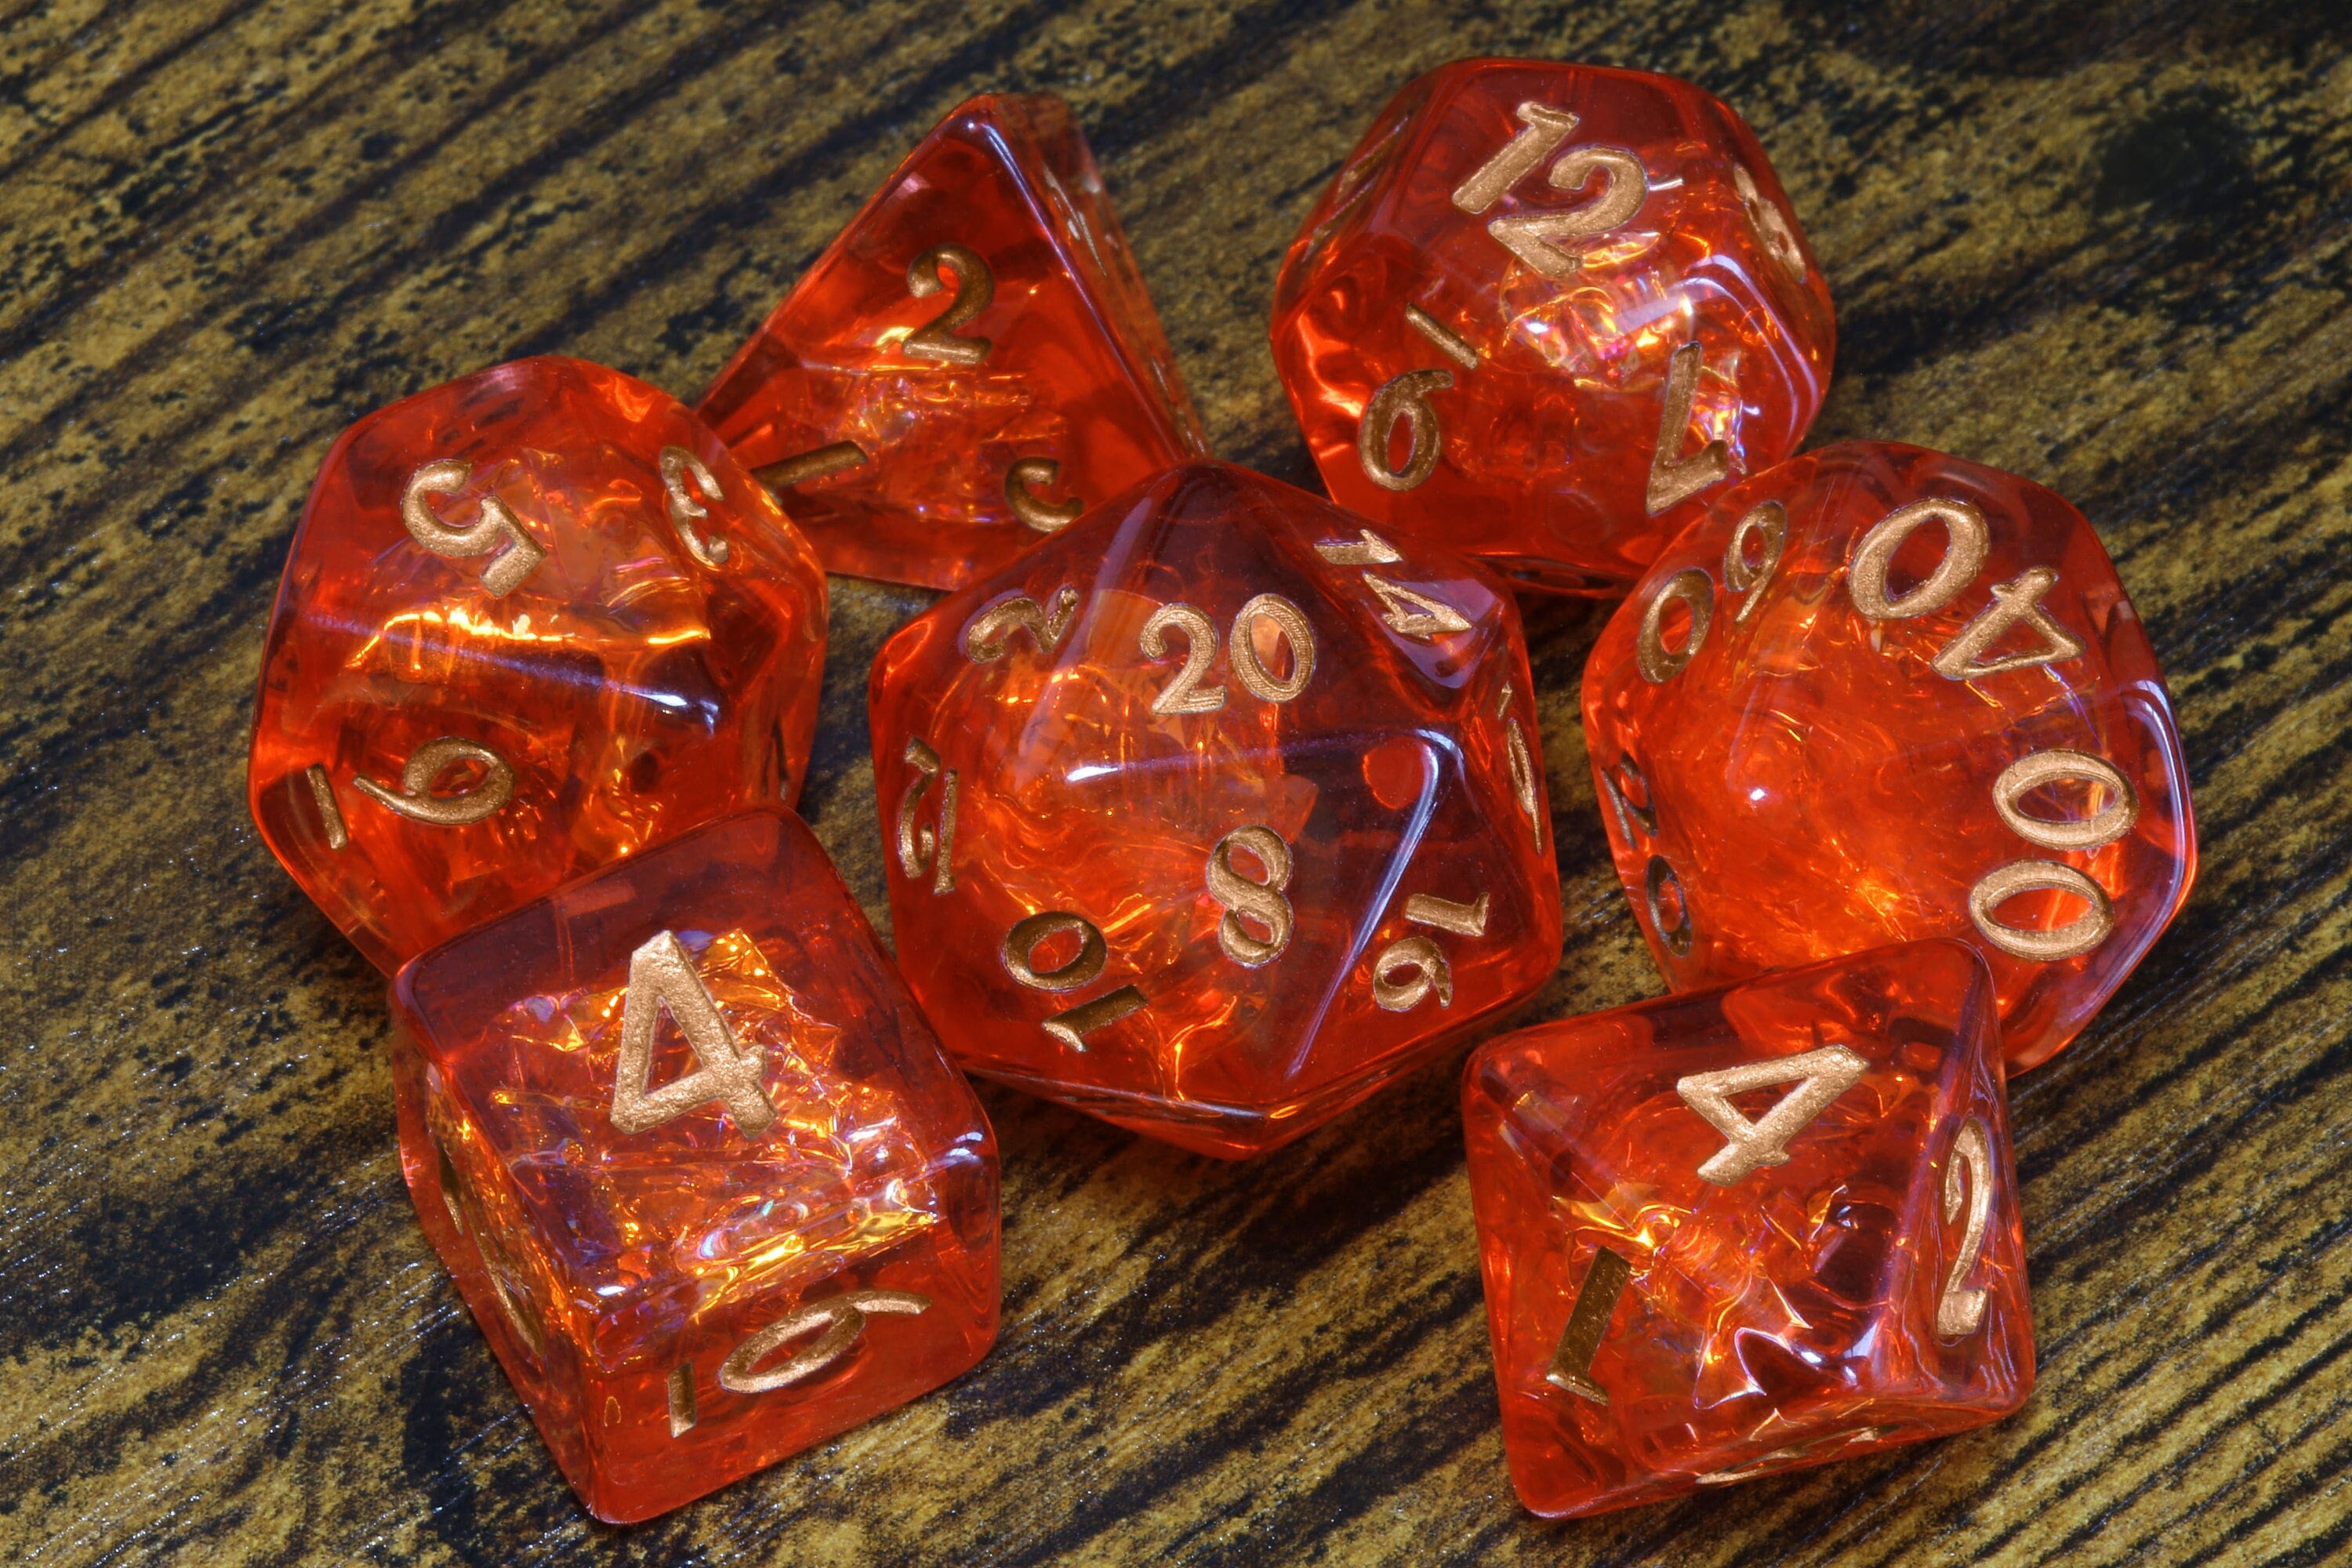 You can certainly try dice vault and fire opal dice set